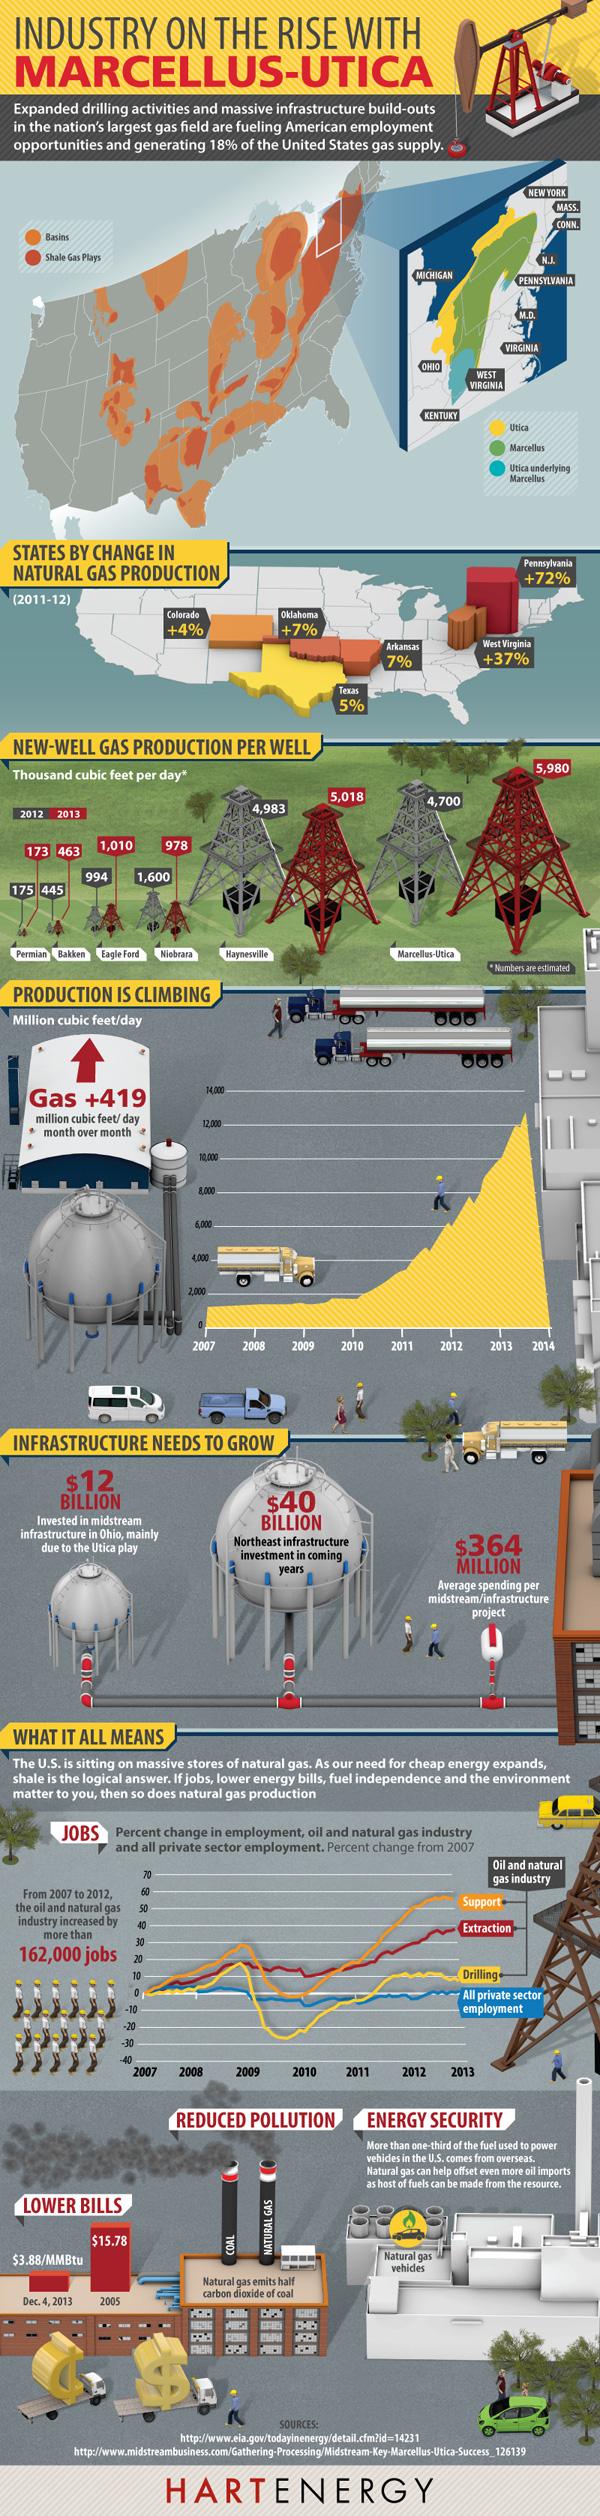 rise-of-marcellus-utica-industry-infographic